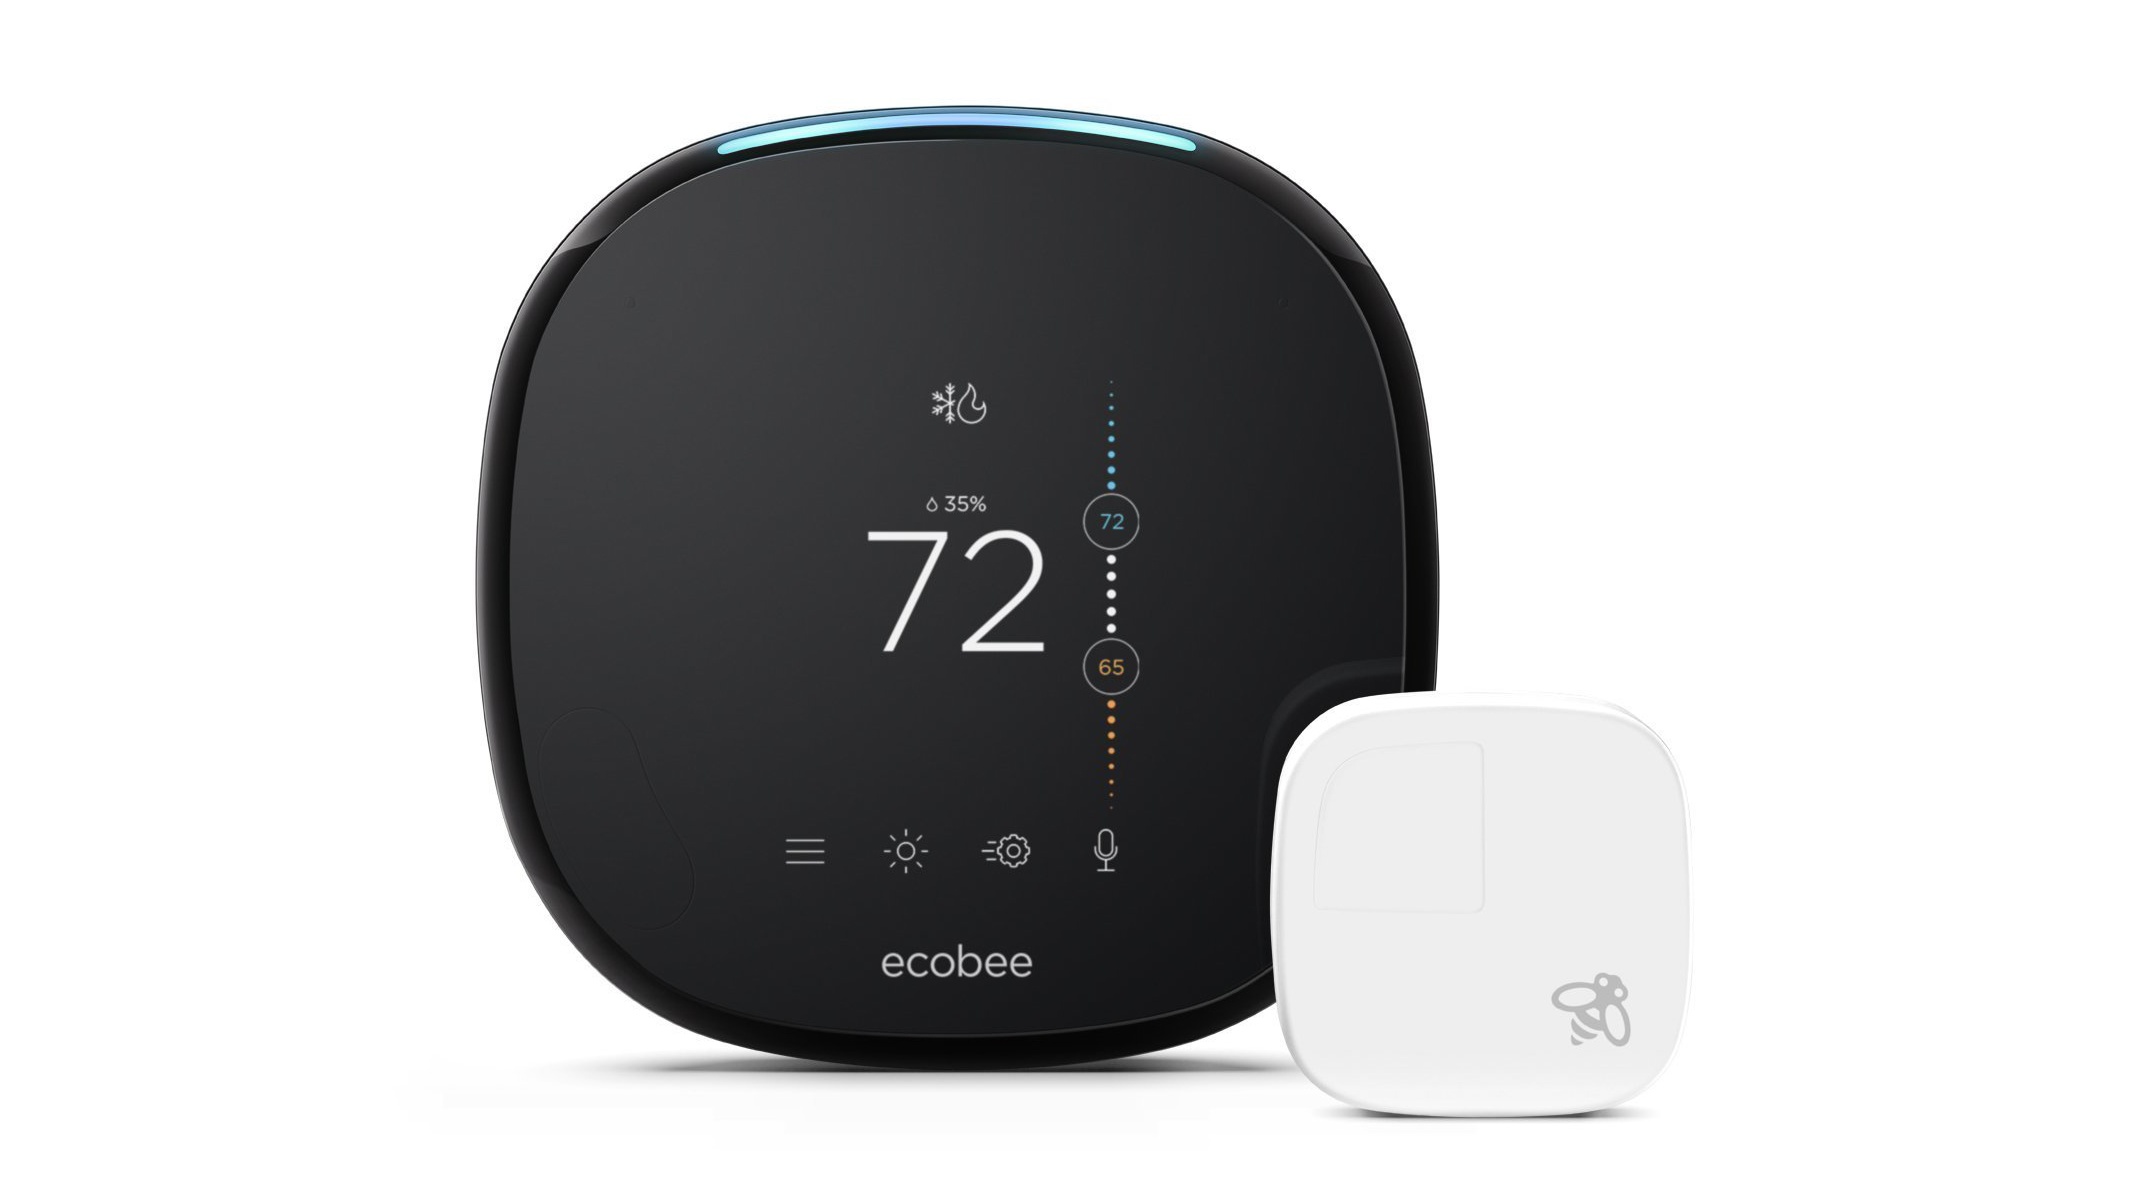 Ecobee SmartThermostat with voice control on a white background